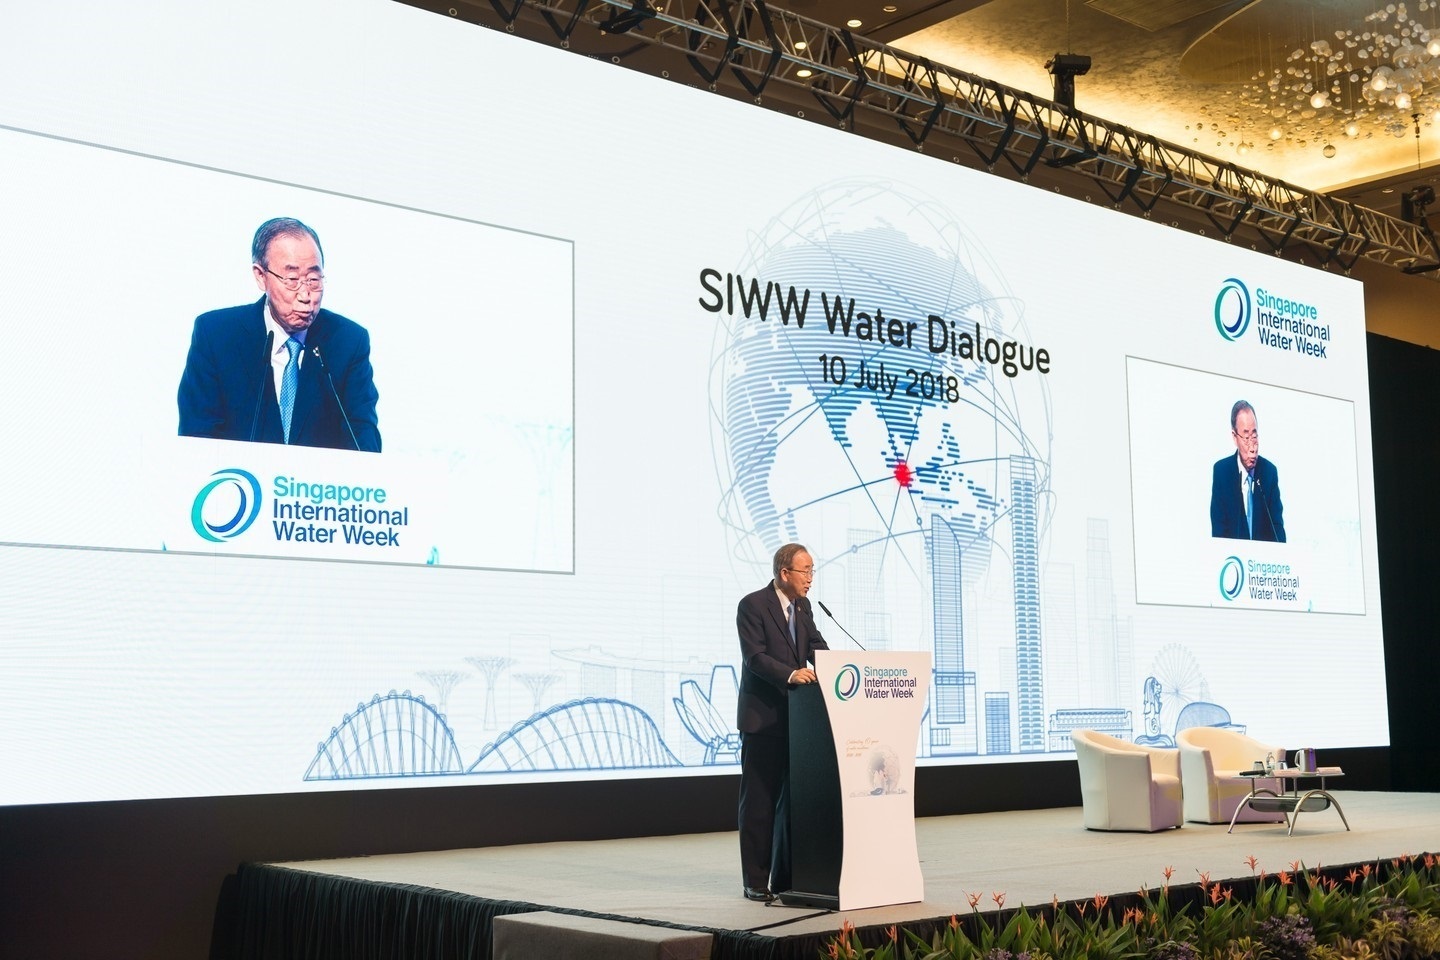 top-10-moments-from-the-singapore-international-water-week-2018---1.jpg